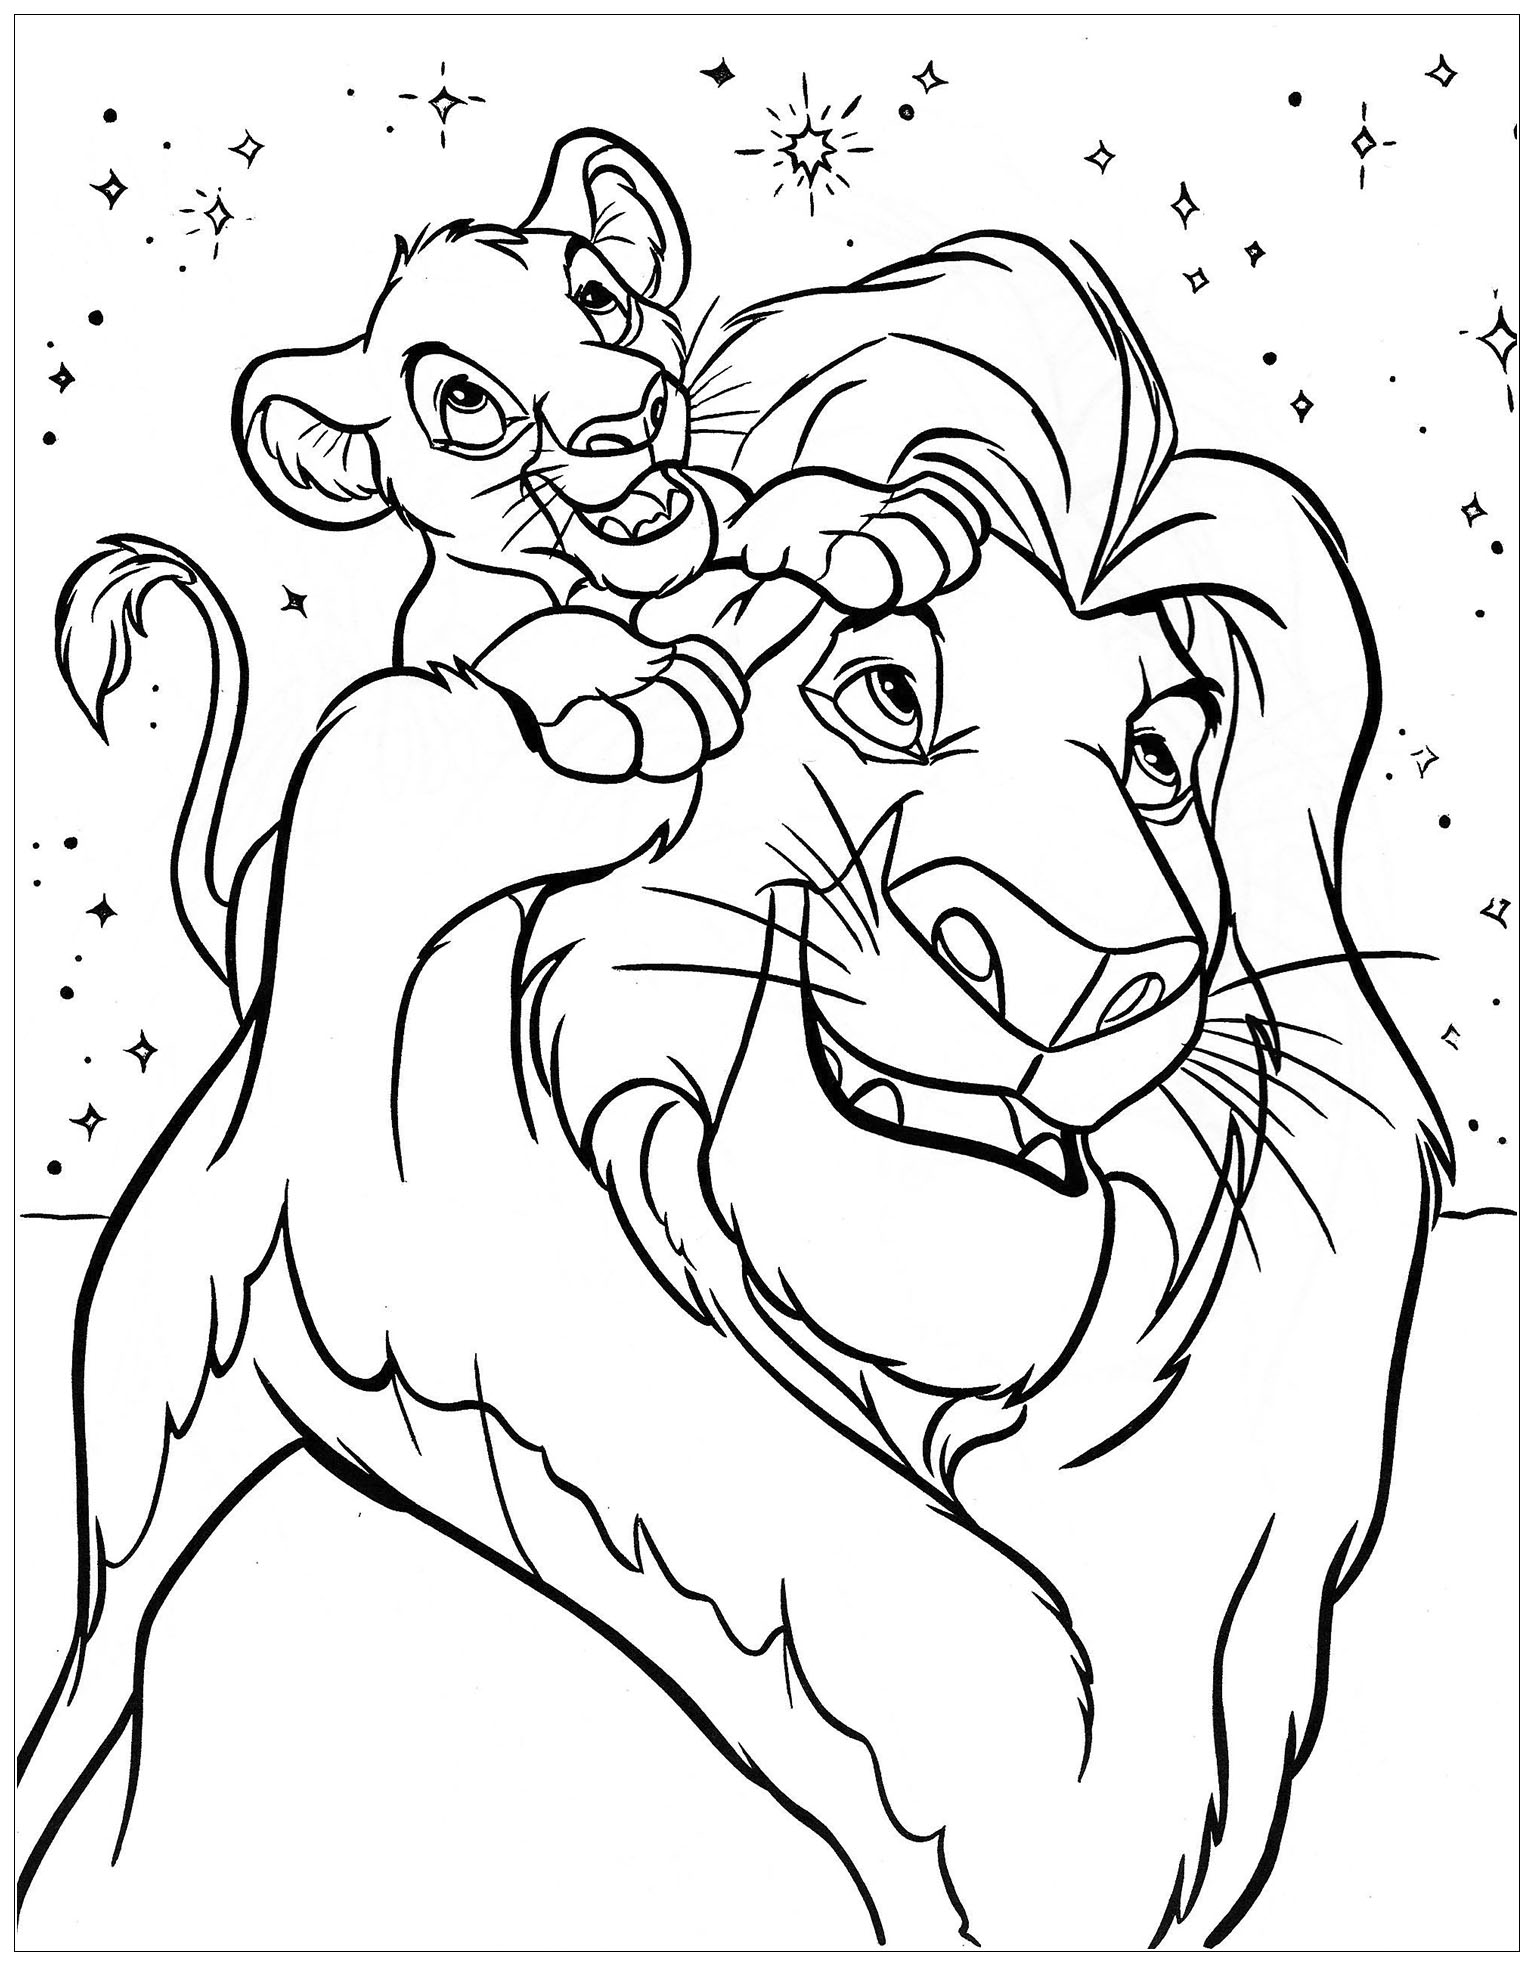 Download Mufasa with his son Simba - The Lion King Kids Coloring Pages